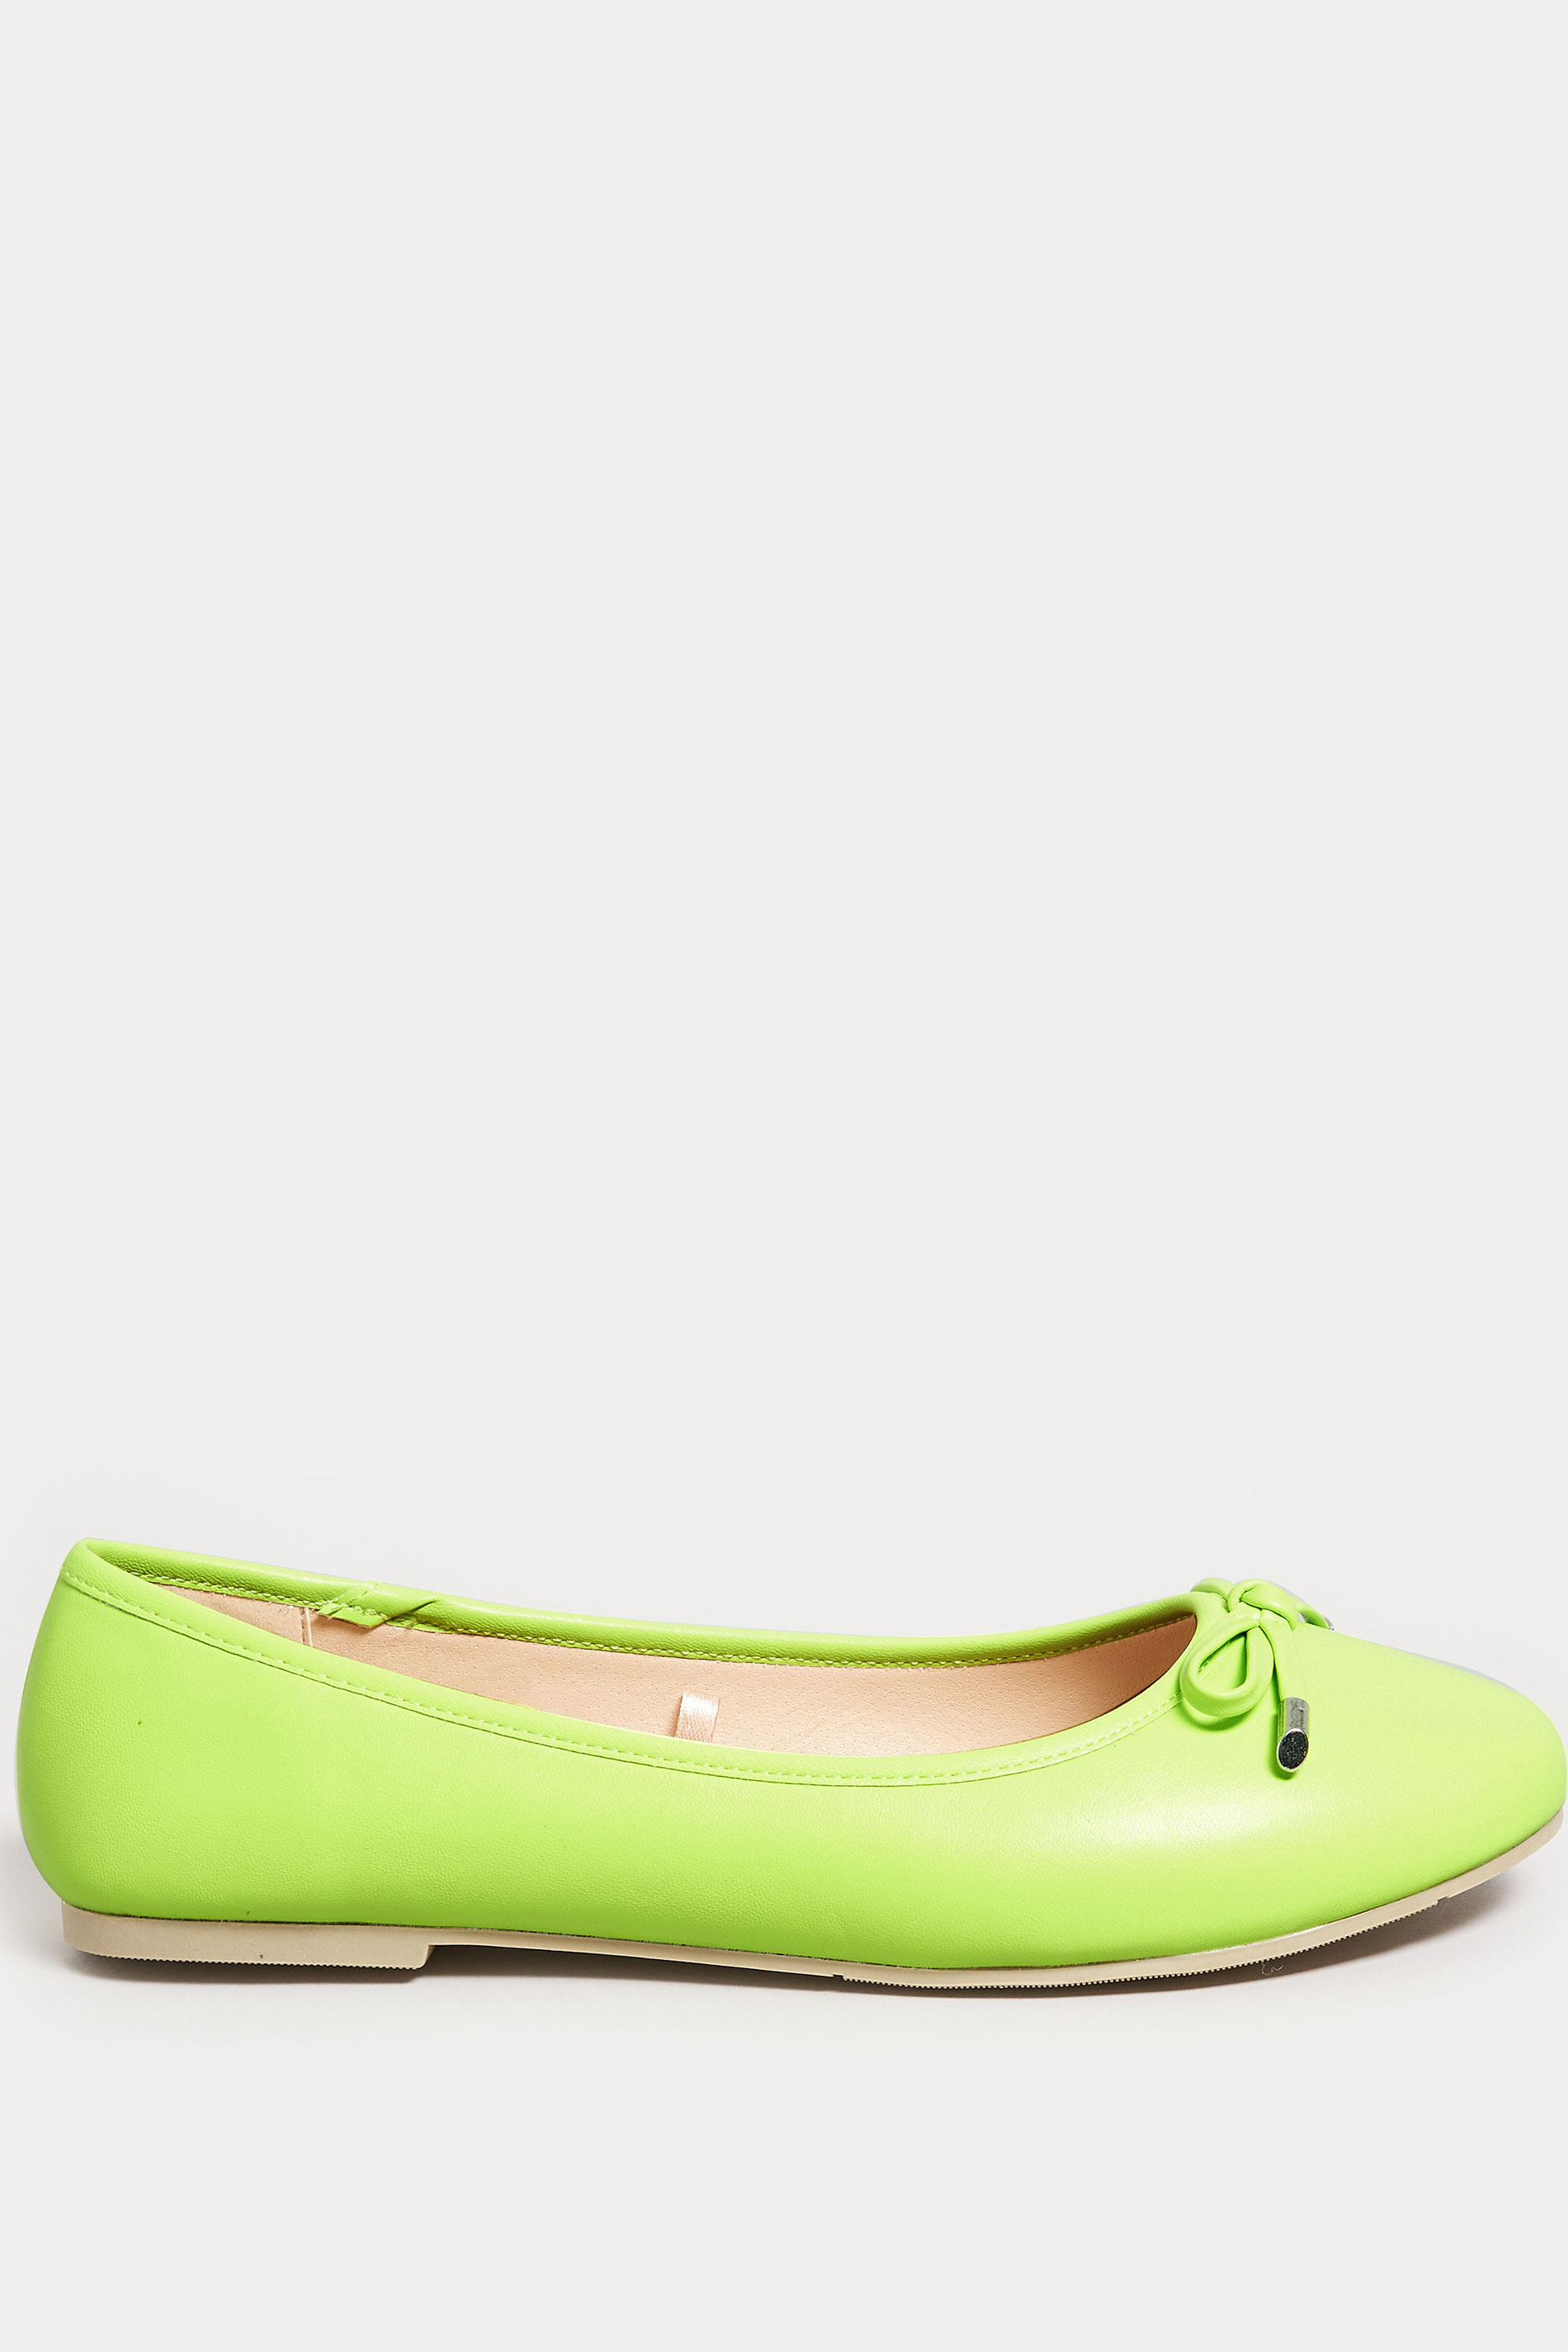 Green Ballerina Pumps In Wide E Fit & Extra Wide EEE Fit | Yours Clothing 3